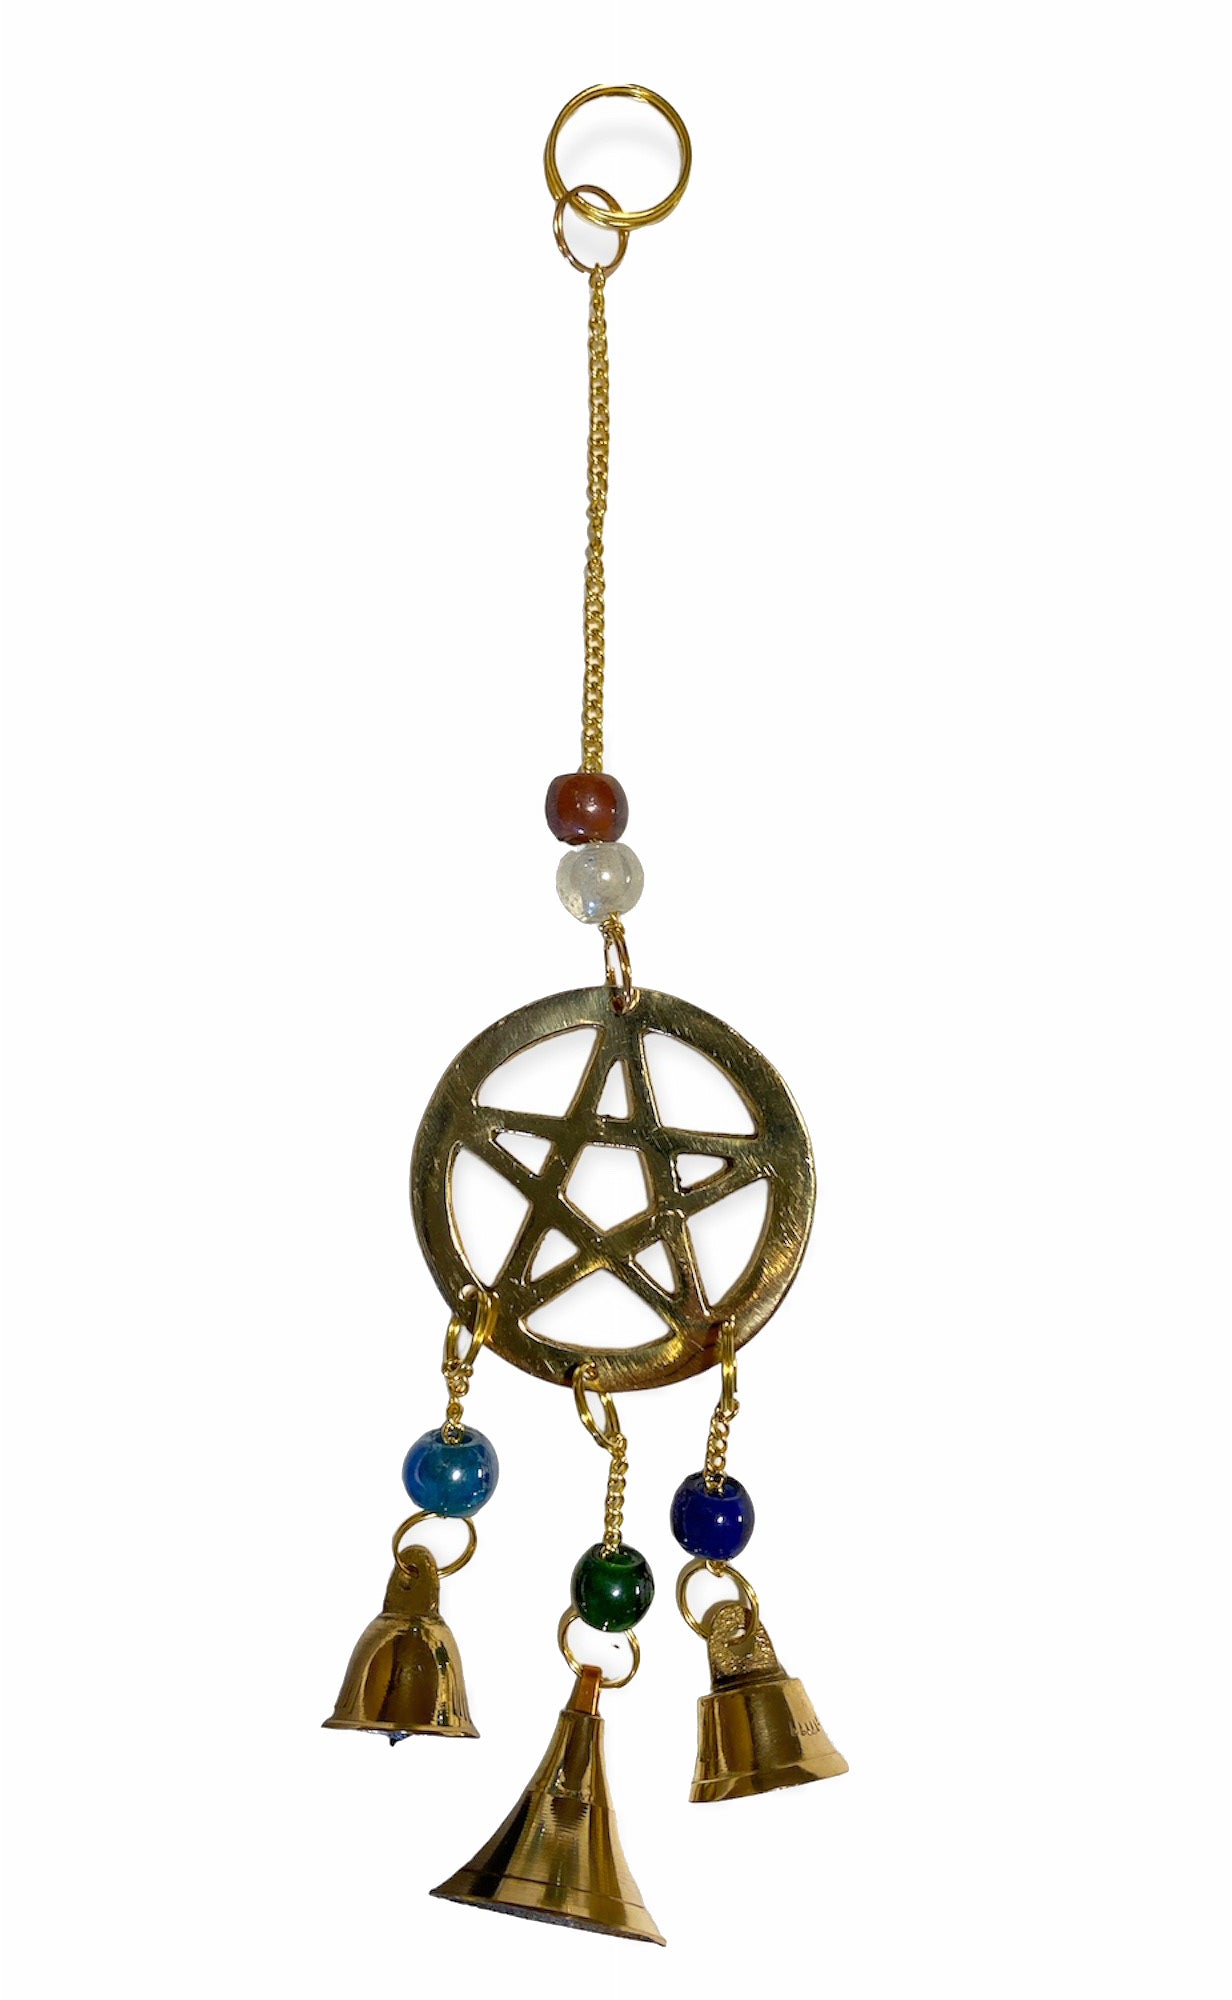 Pentacle  Design Brass WIND CHIME - 9 inch - India - NEW922